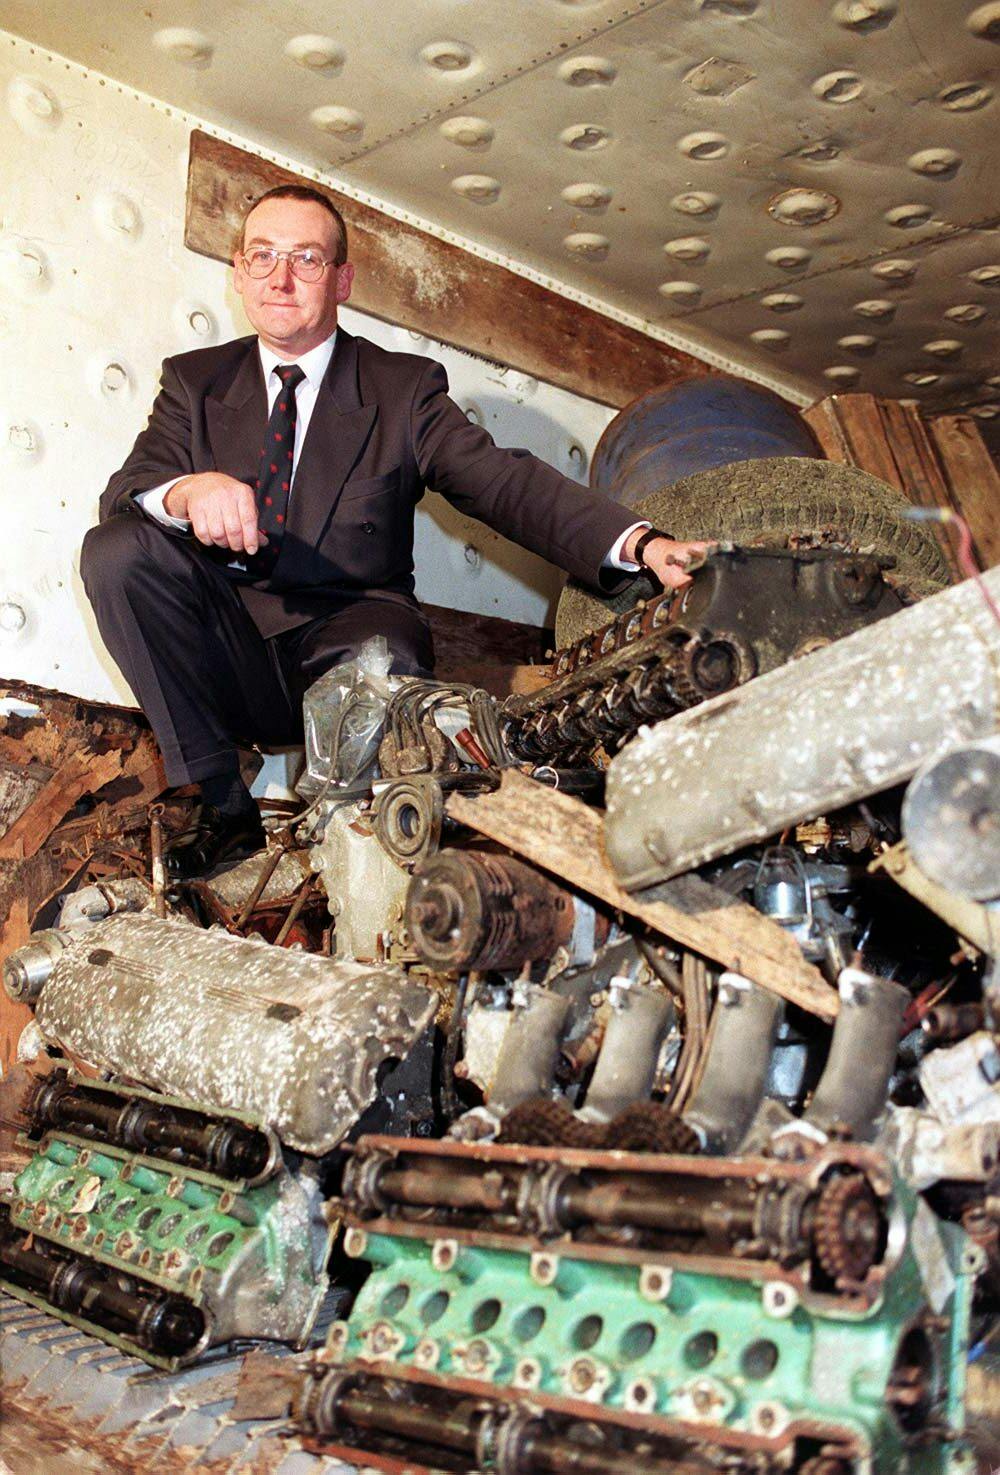 Detective Super Terry Ives sitting on Lord Brocket recovered engines classic car theft scam